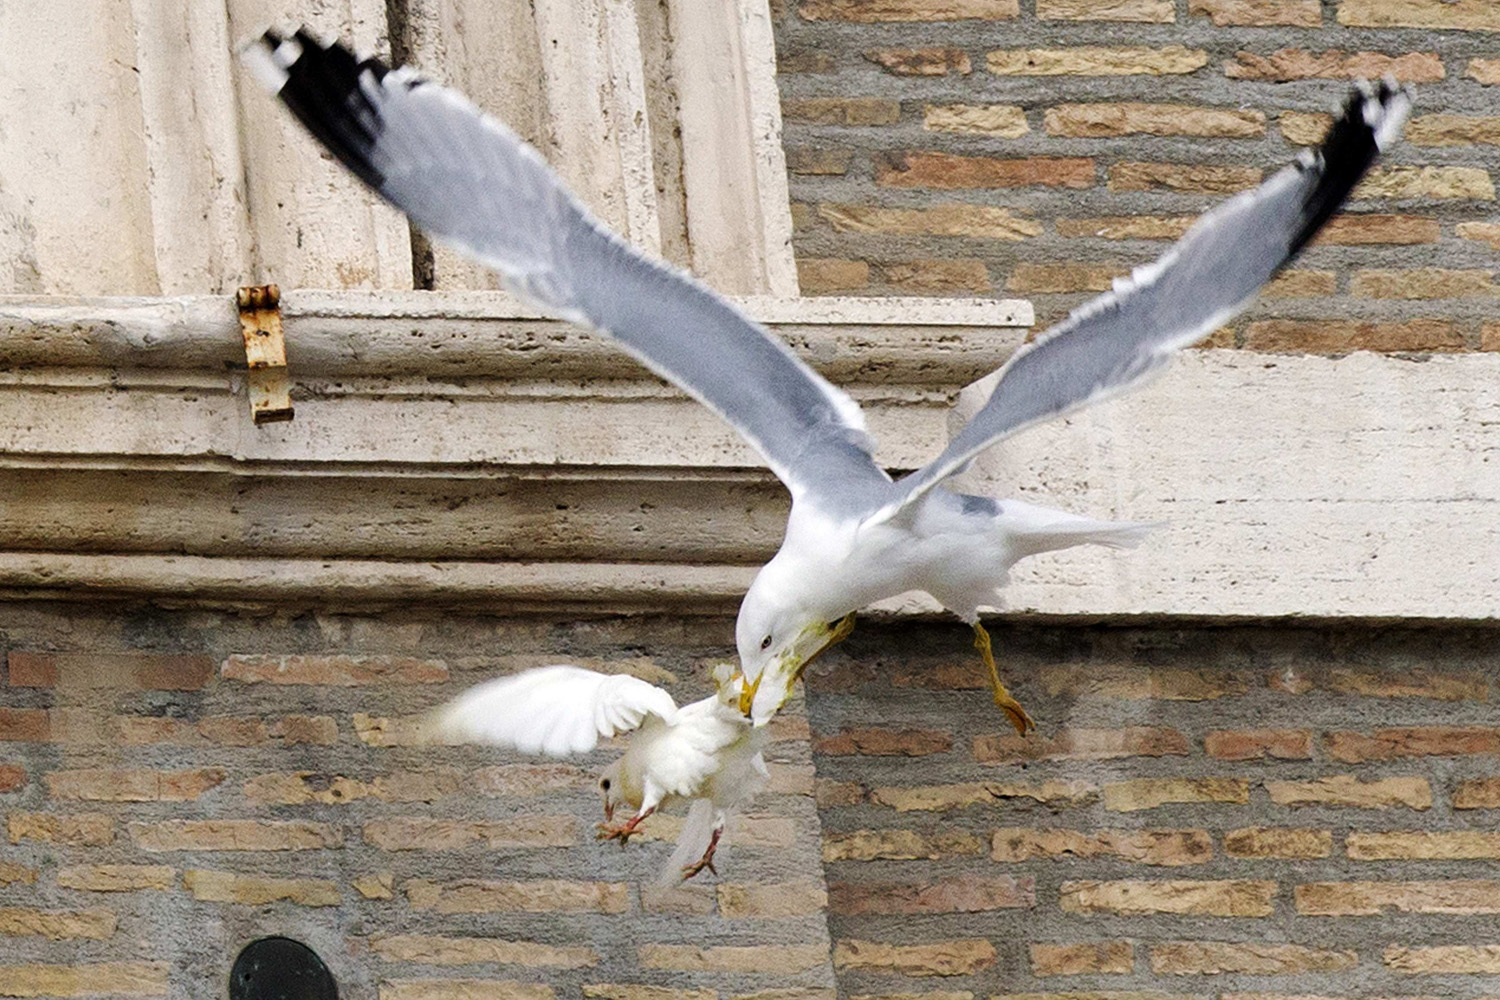 A seagull attacks a dove released during a prayer conducted by Pope Francis.